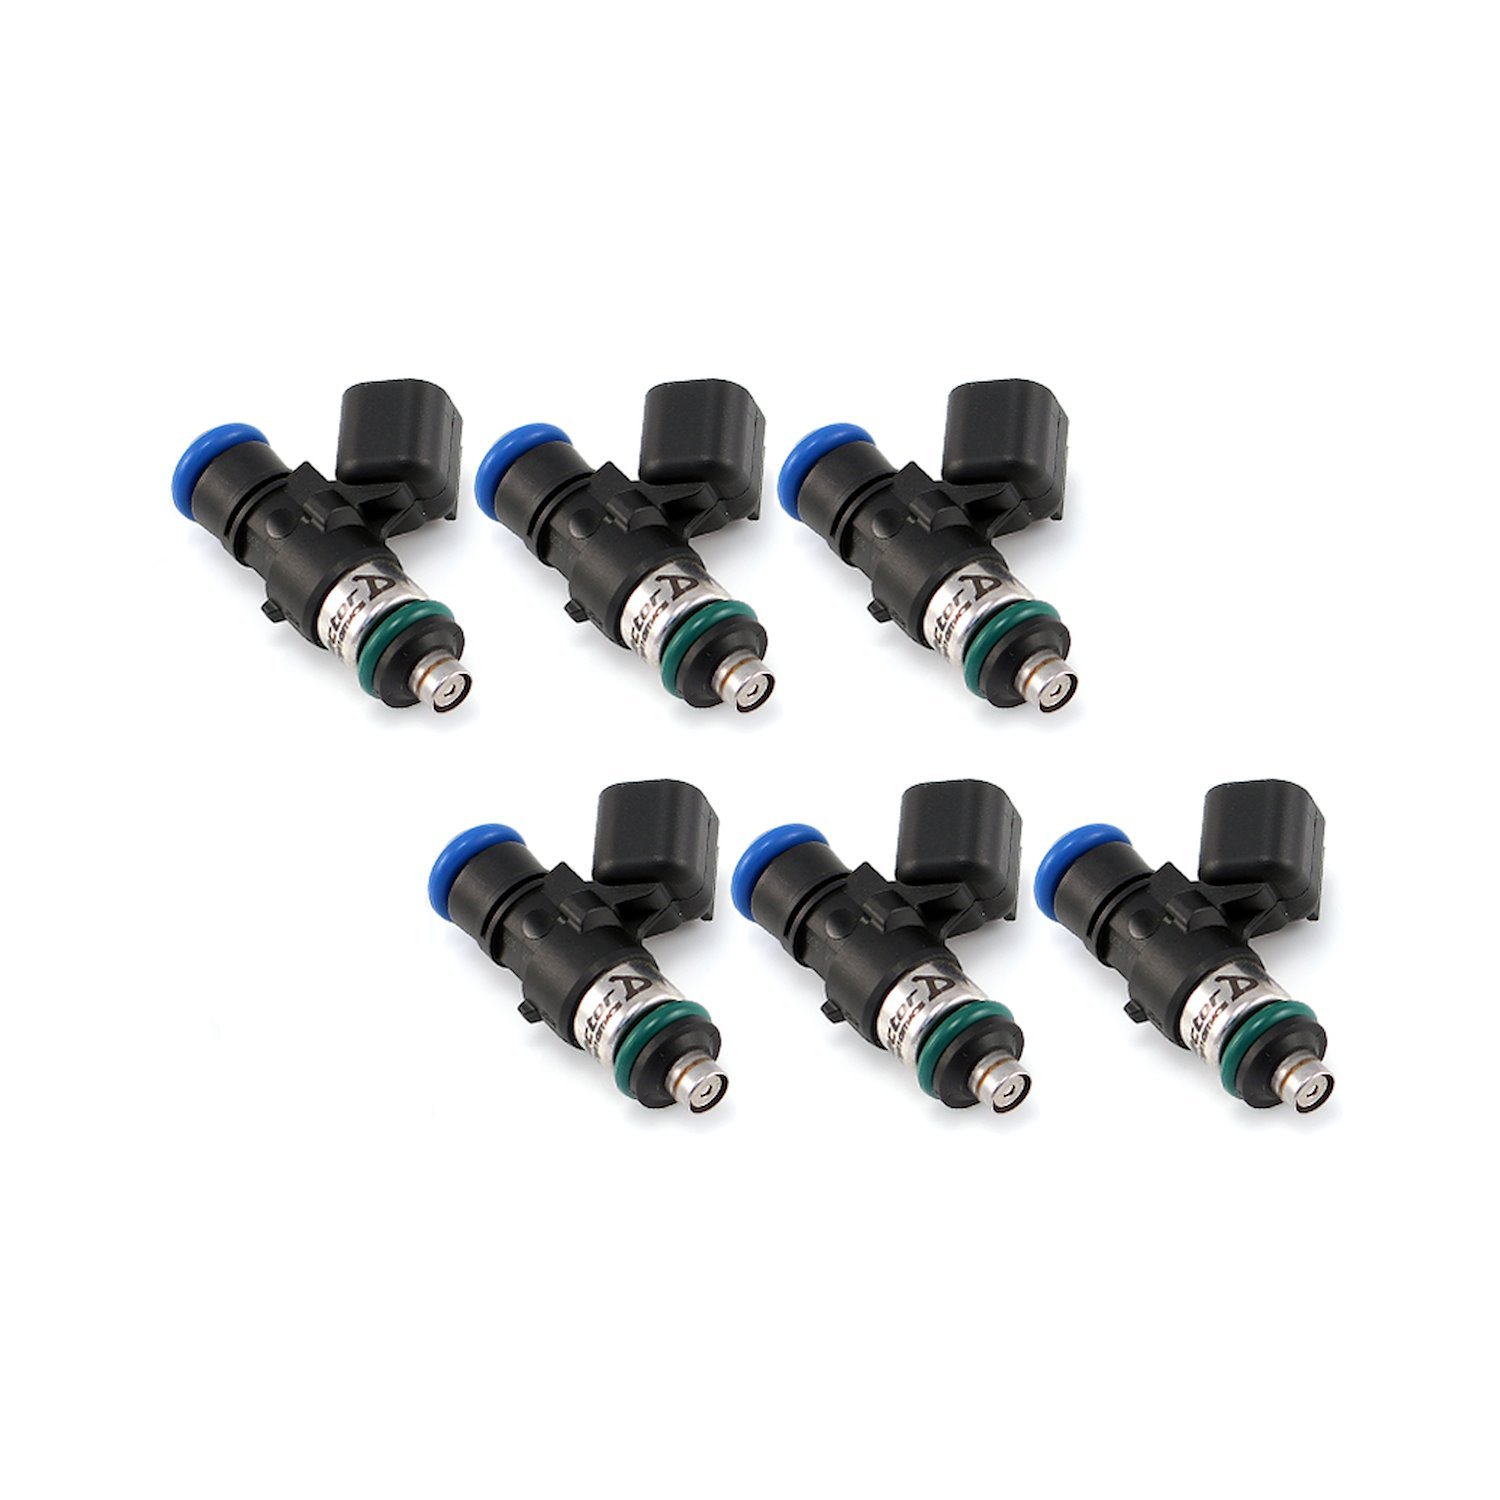 1050.34.14.14.6 1050cc Fuel Injector Set, 14 mm Lower O-Ring (No Adapter Top)